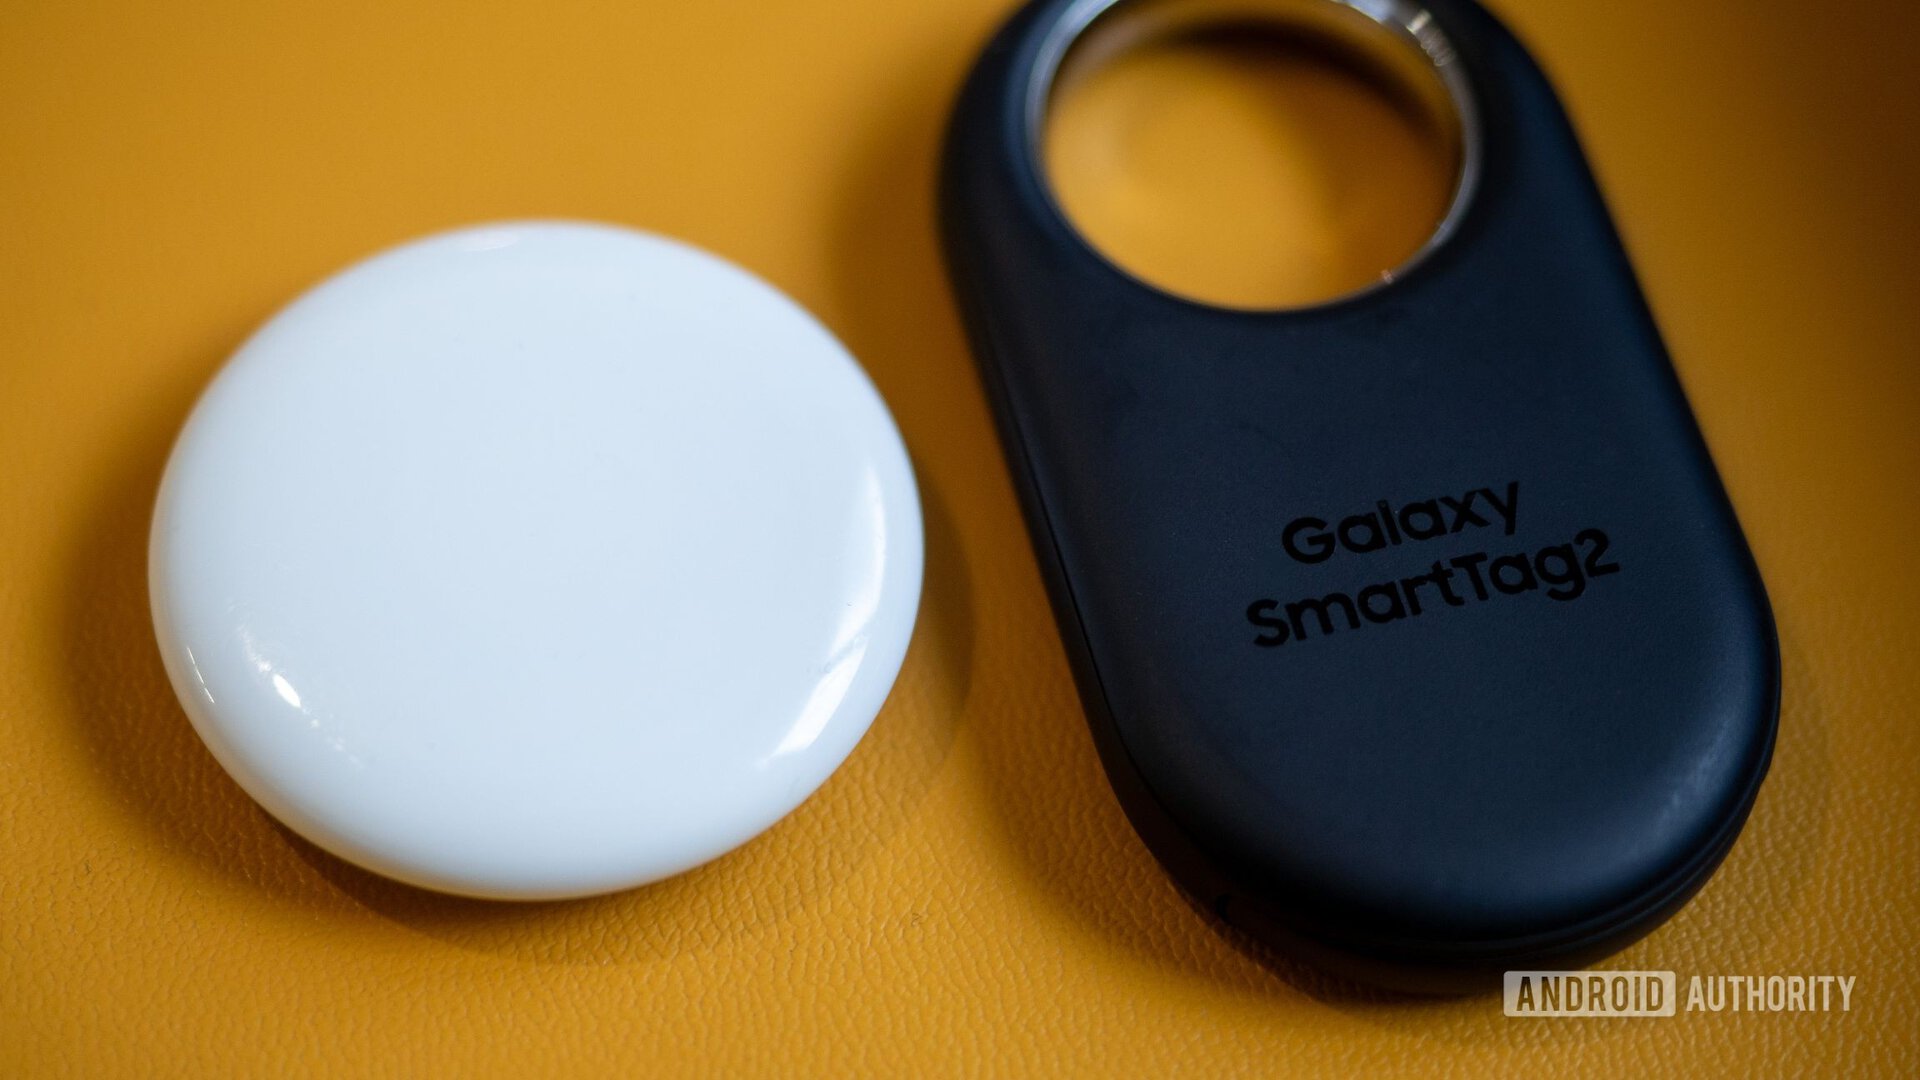 Samsung Galaxy SmartTag2 review - Android Authority